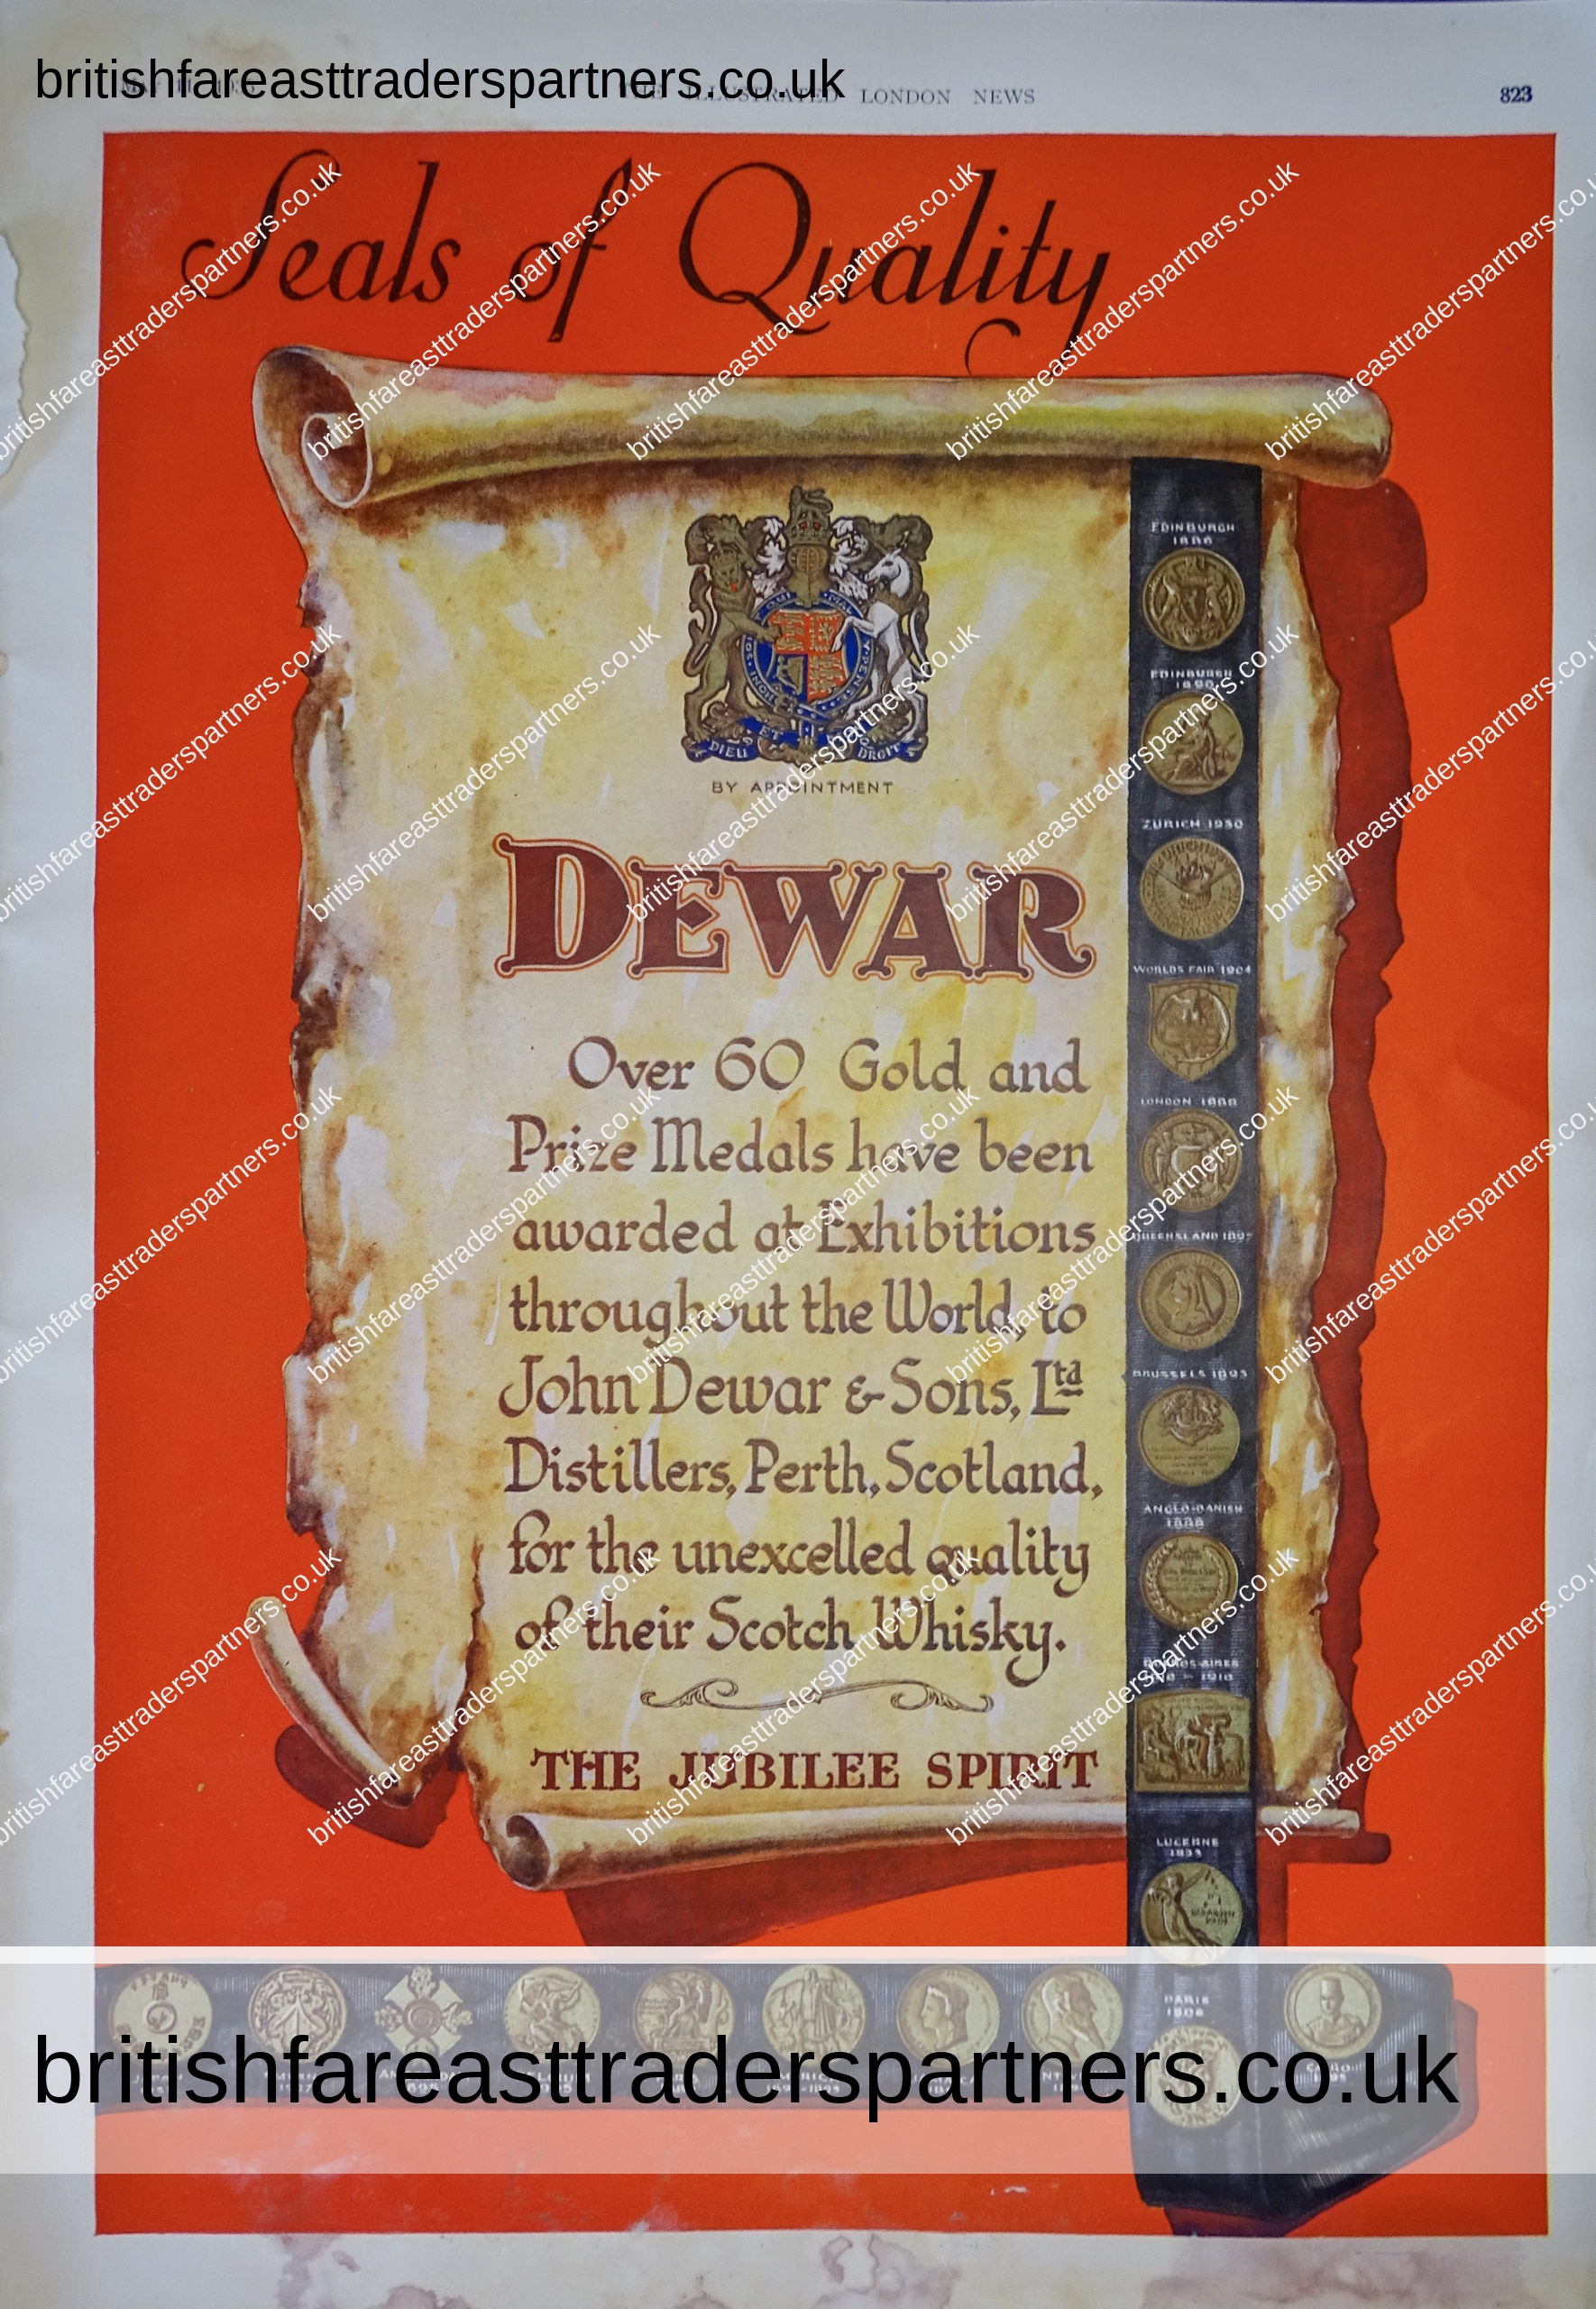 VINTAGE May 11, 1935 DEWAR Seals of Quality 60 GOLD & Prize Medals John Dewar & Sons Ltd SCOTCH WHISKY THE JUBILEE SPIRIT THE ILLUSTRATED LONDON NEWS COLLECTABLE ADVERTISEMENT EPHEMERA